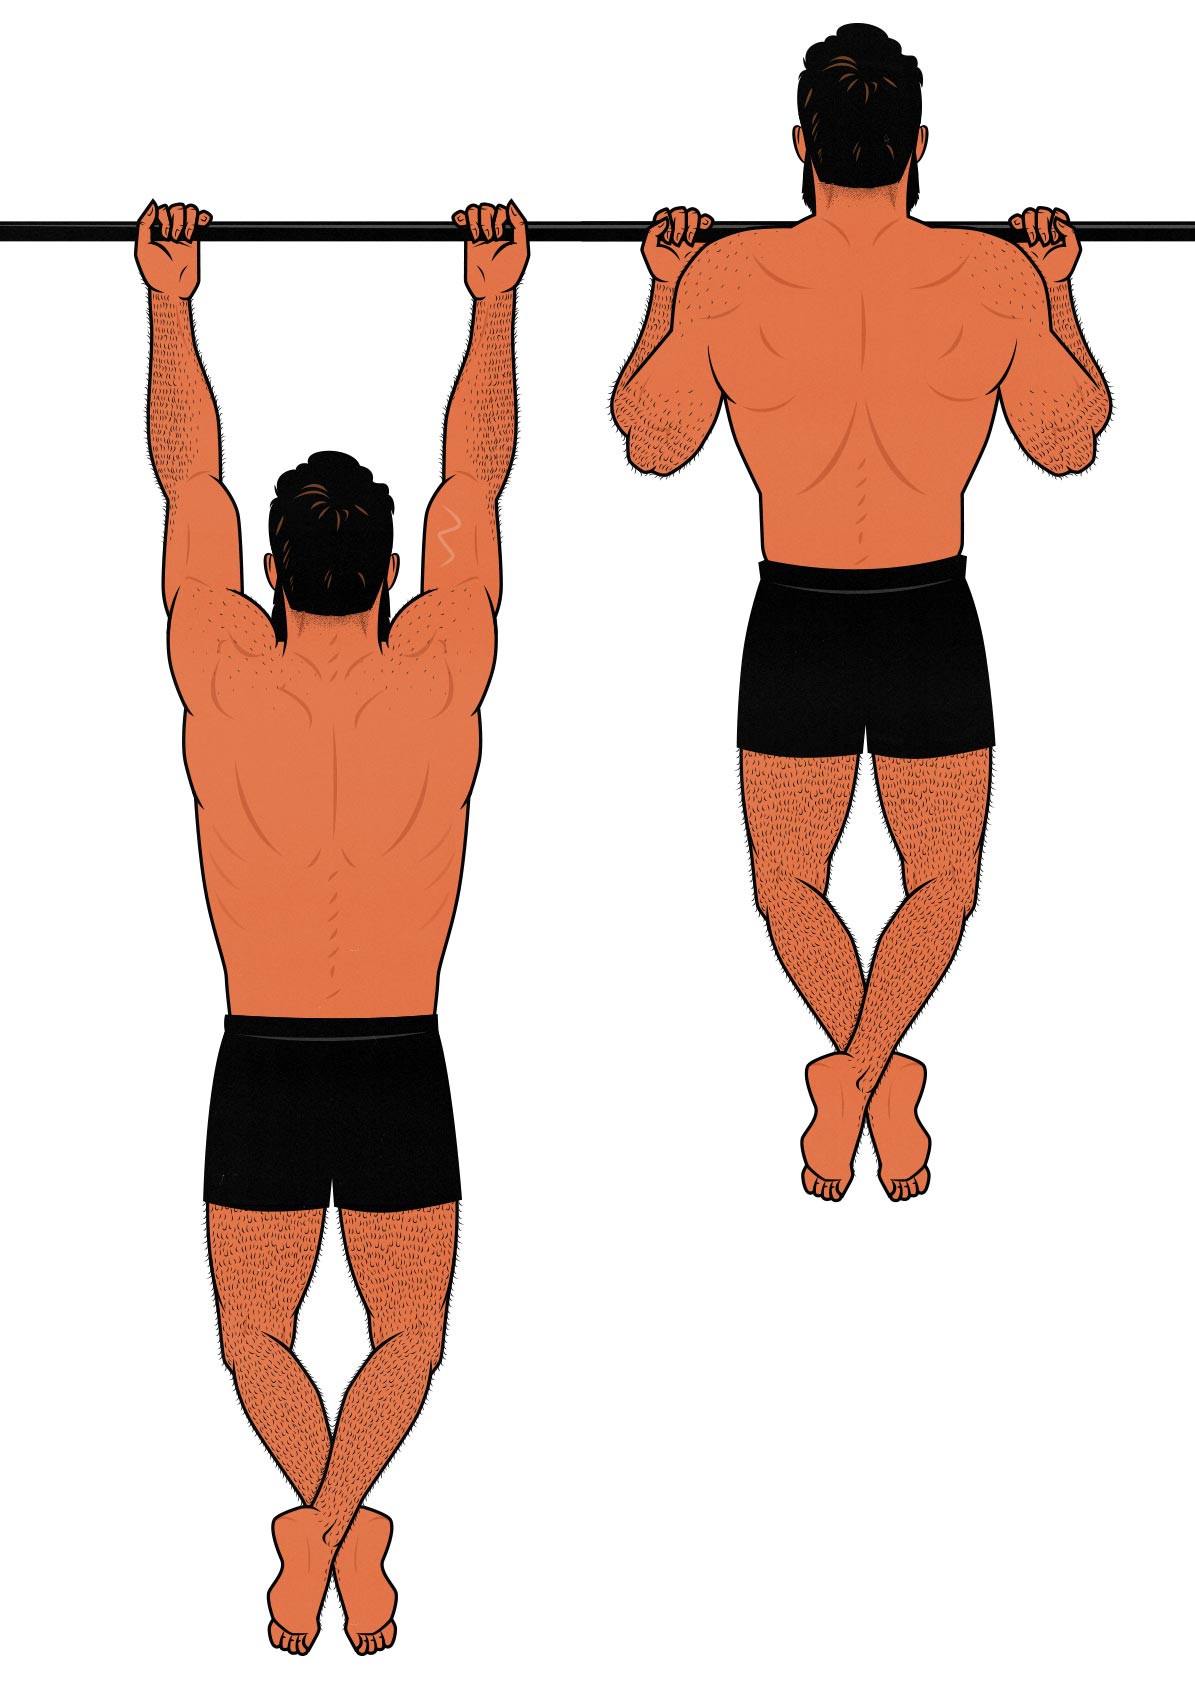 Illustration of a man doing chin-ups to build a bigger back. Illustrated by Shane Duquette for Outlift.